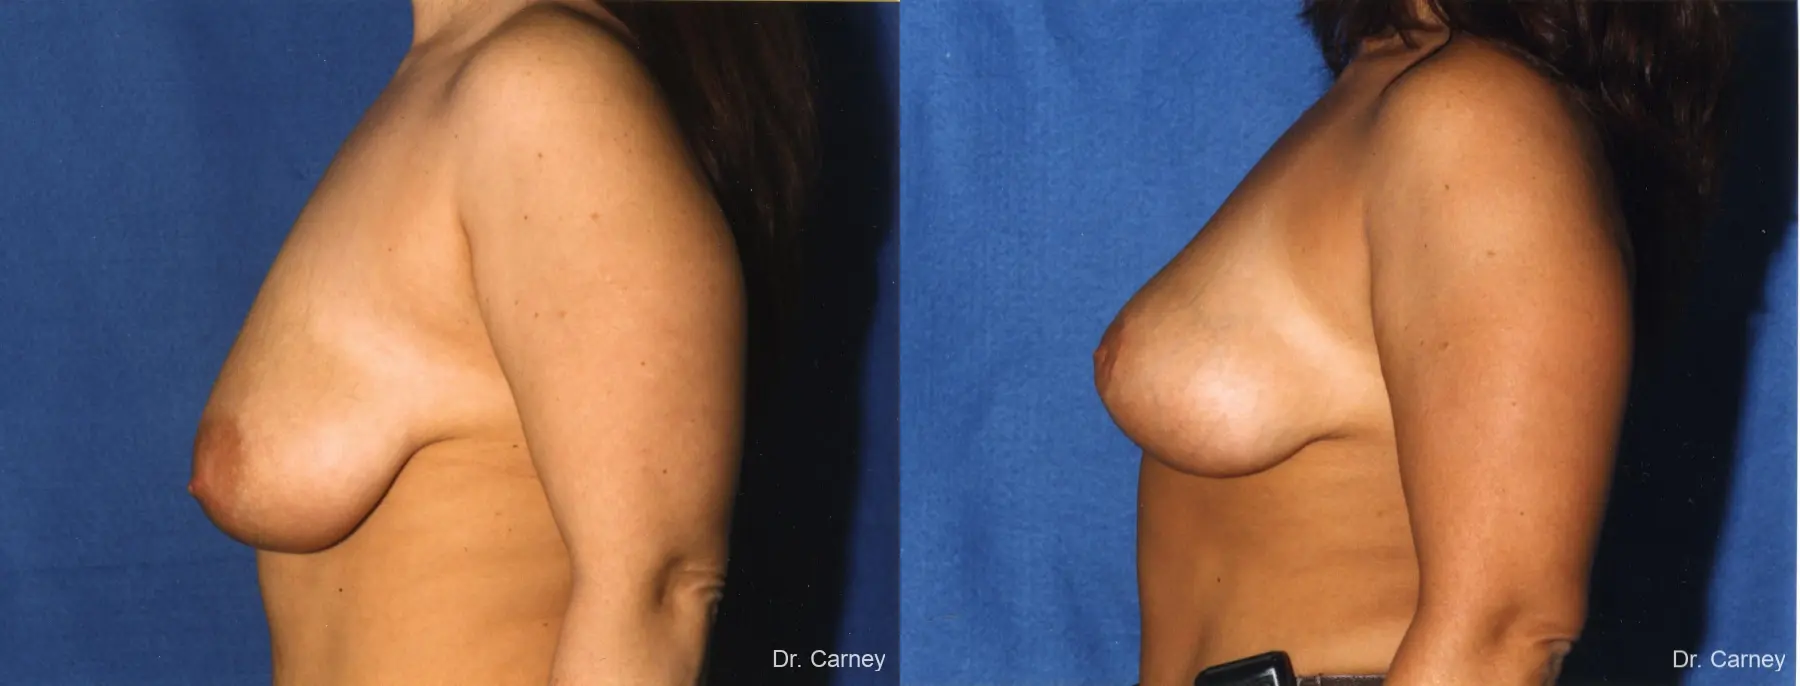 Virginia Beach Breast Lift 1187 - Before and After 2